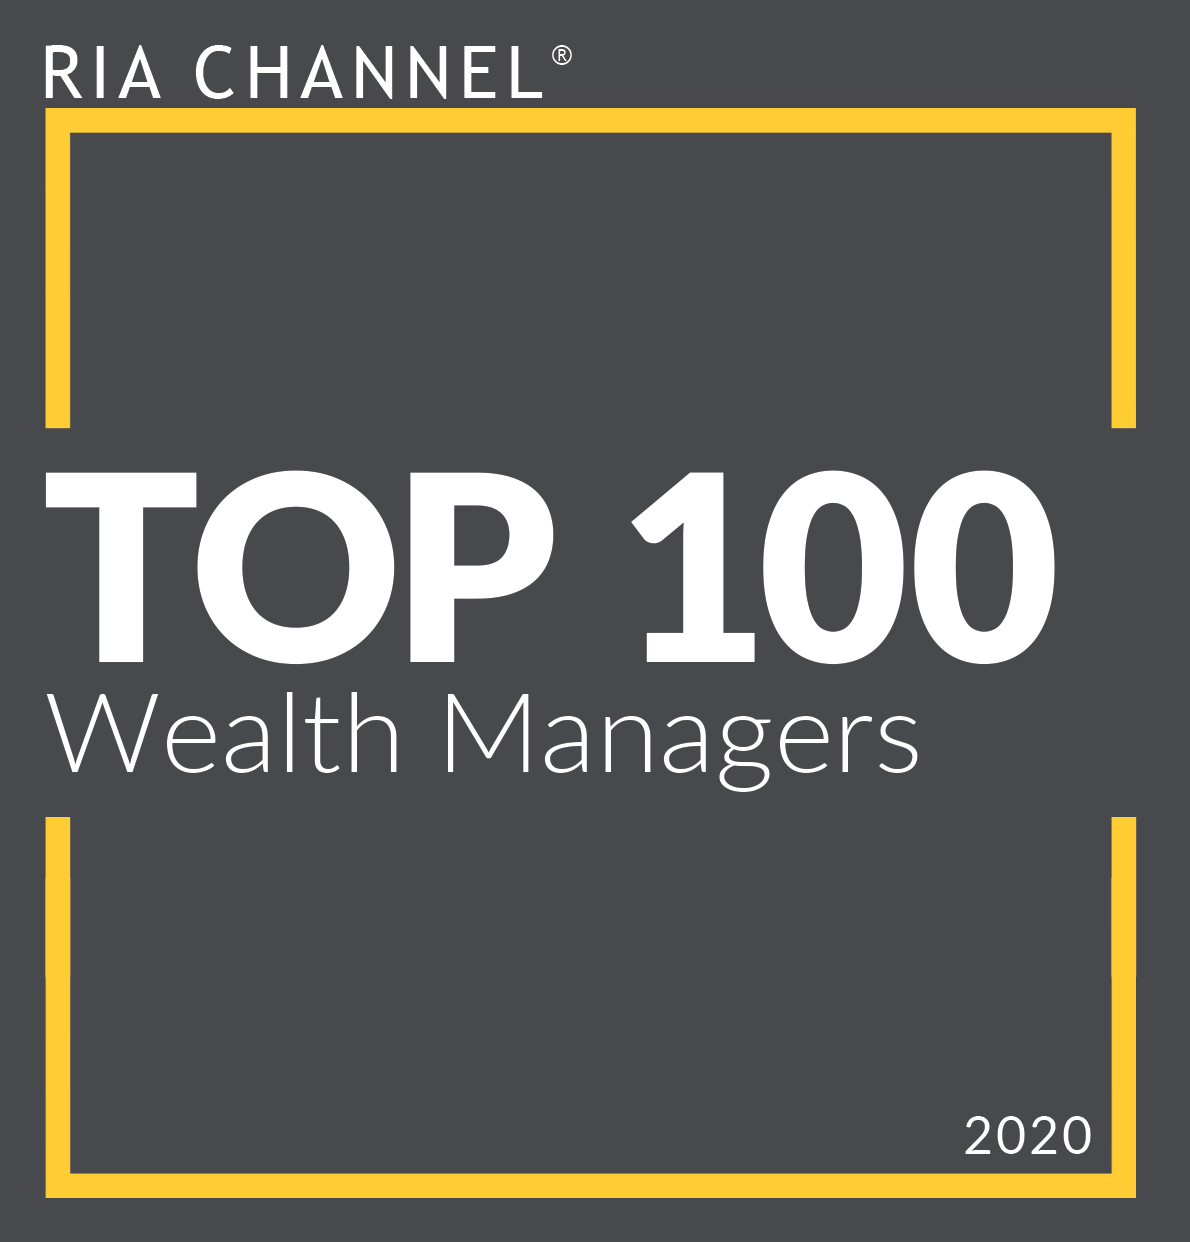 Top Wealth Manager List - 2020 - RIA